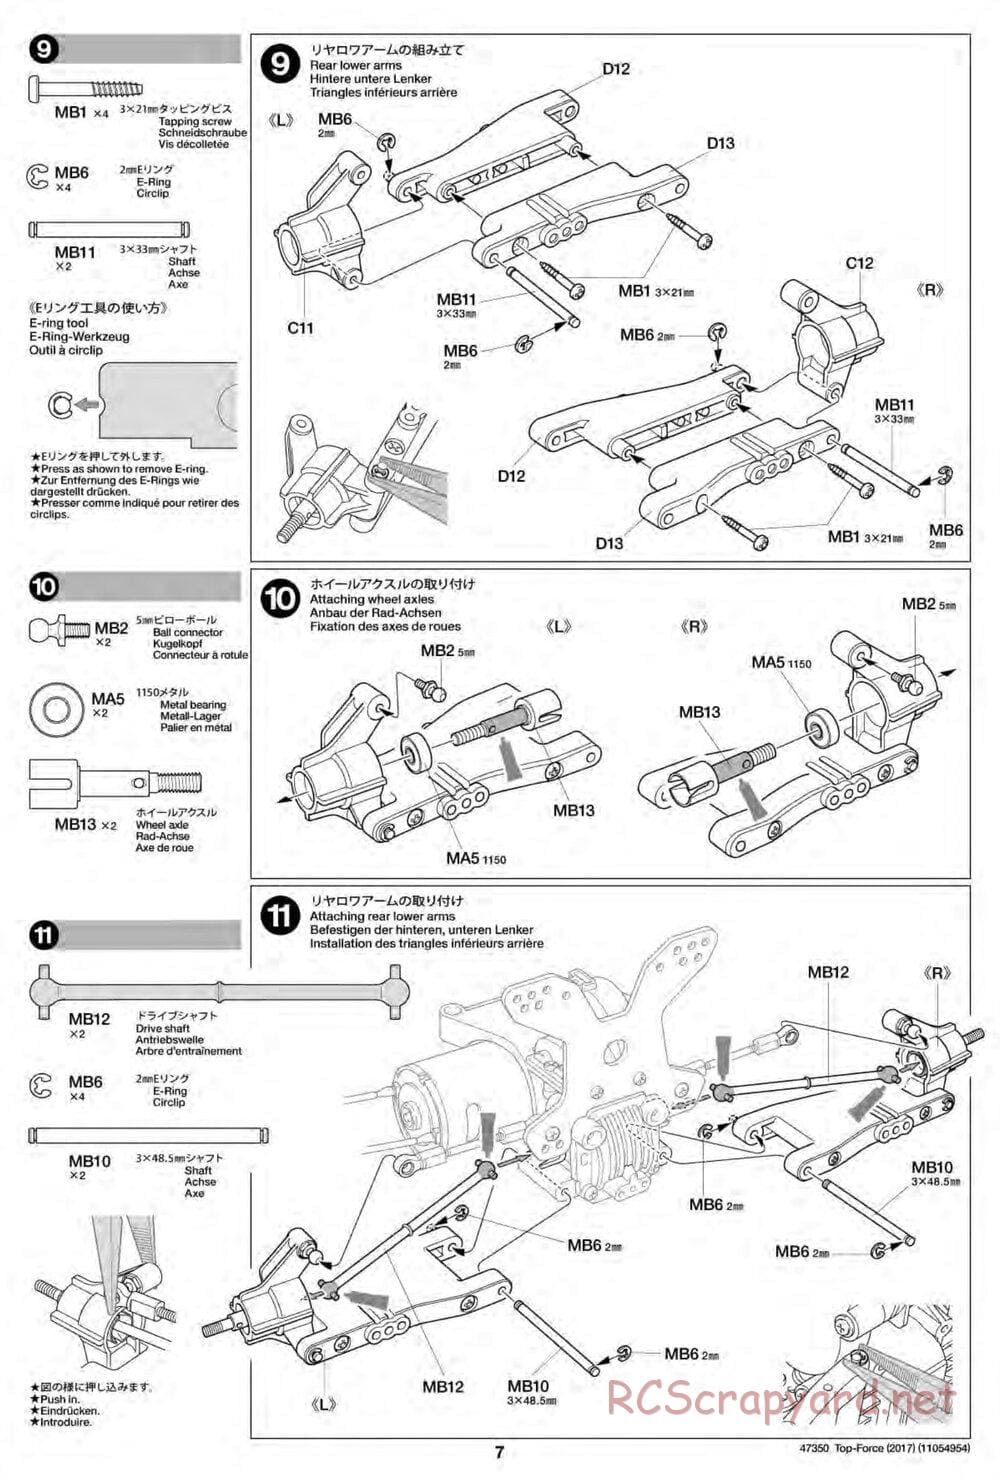 Tamiya - Top Force 2017 - DF-01 Chassis - Manual - Page 7